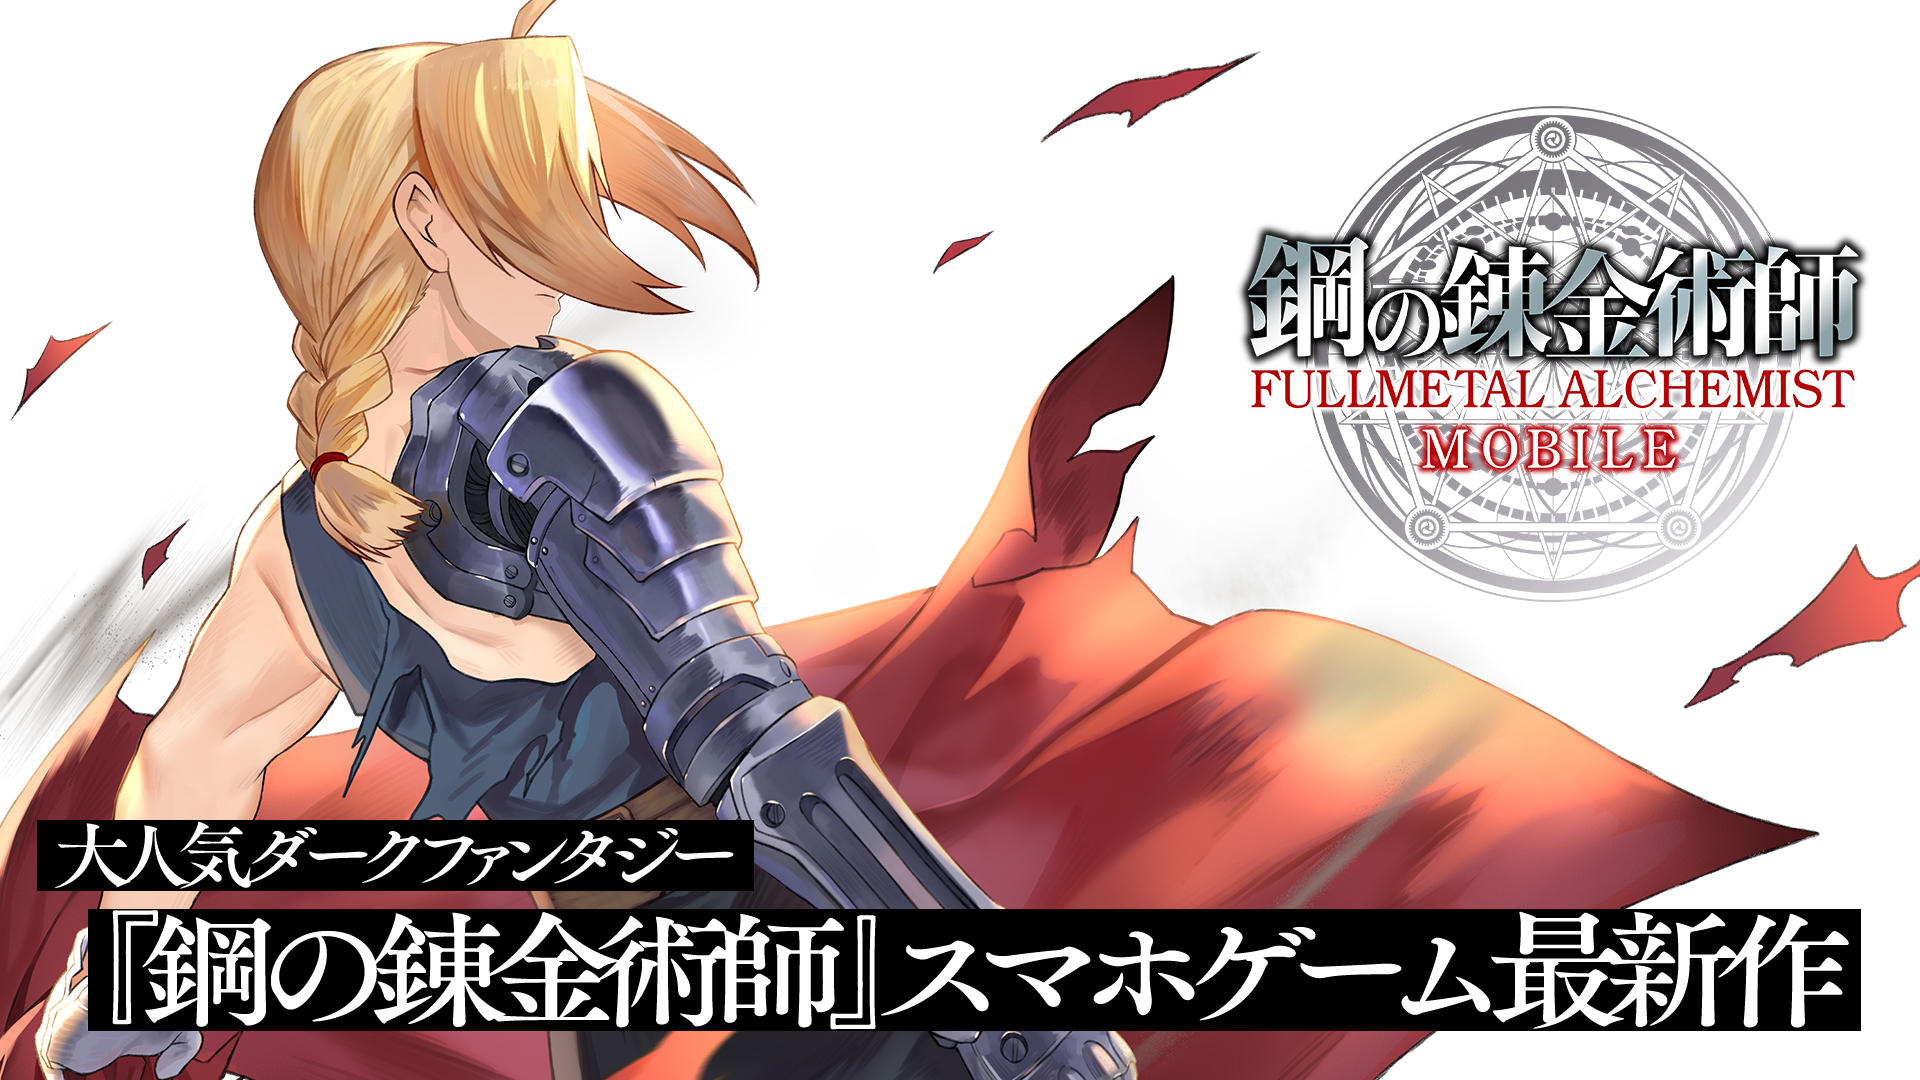 Screenshot 1 of Fullmetal Alchemist Mobile (Only Available in JP) 1.0.4